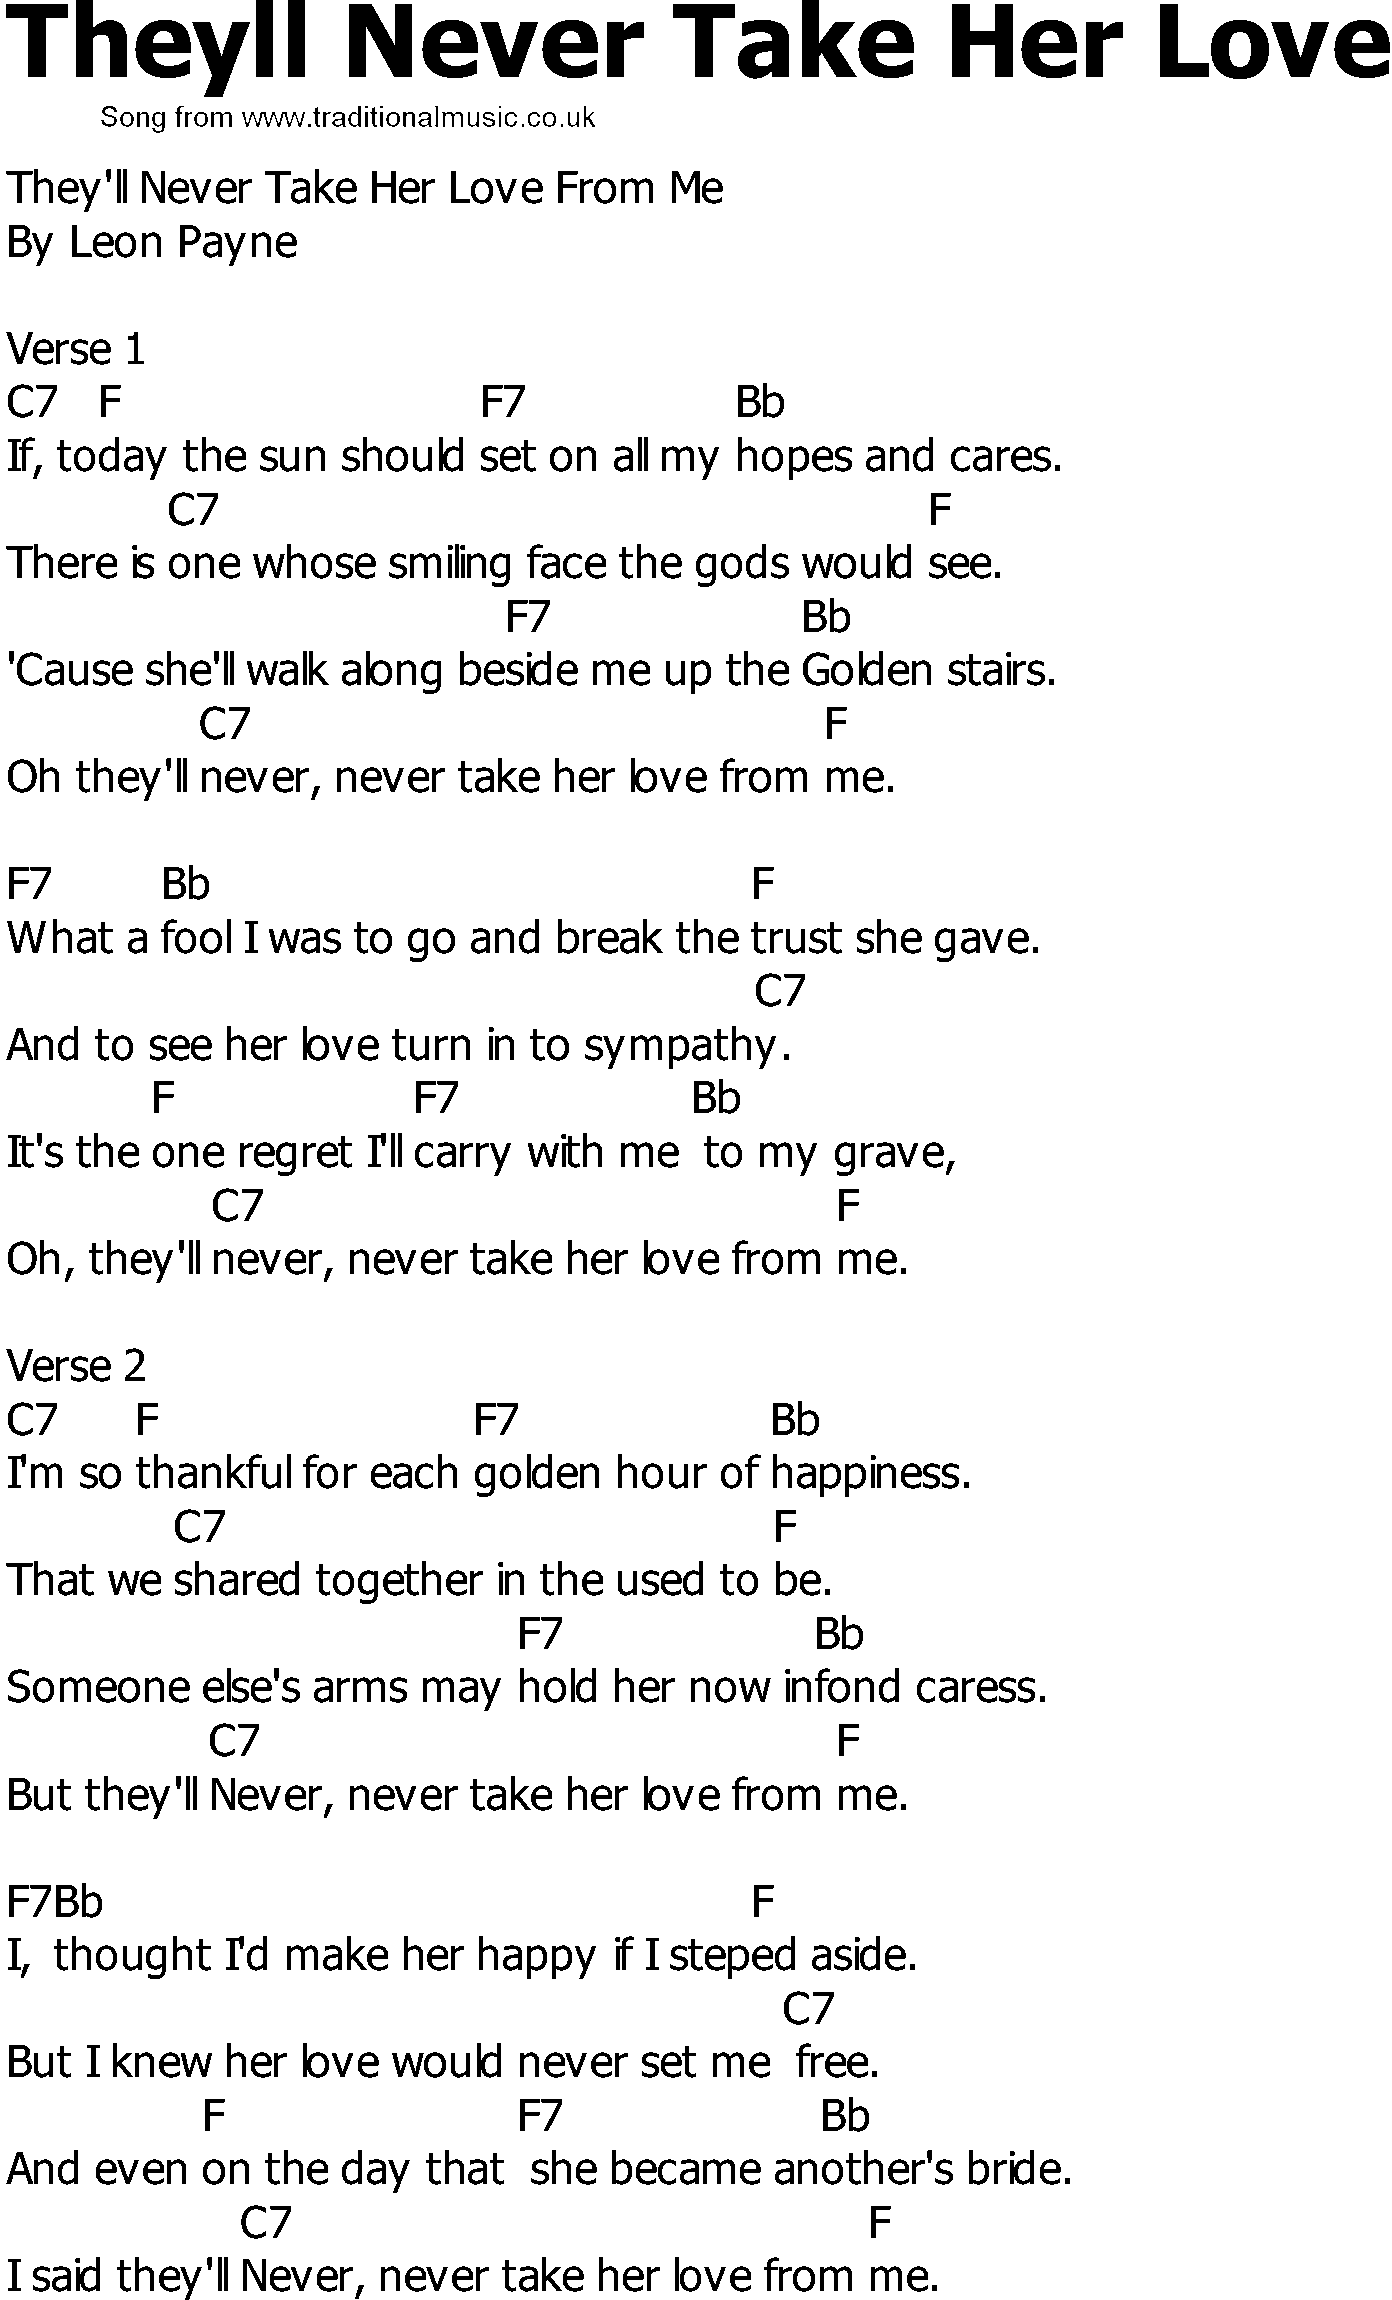 Old Country song lyrics with chords - Theyll Never Take Her Love